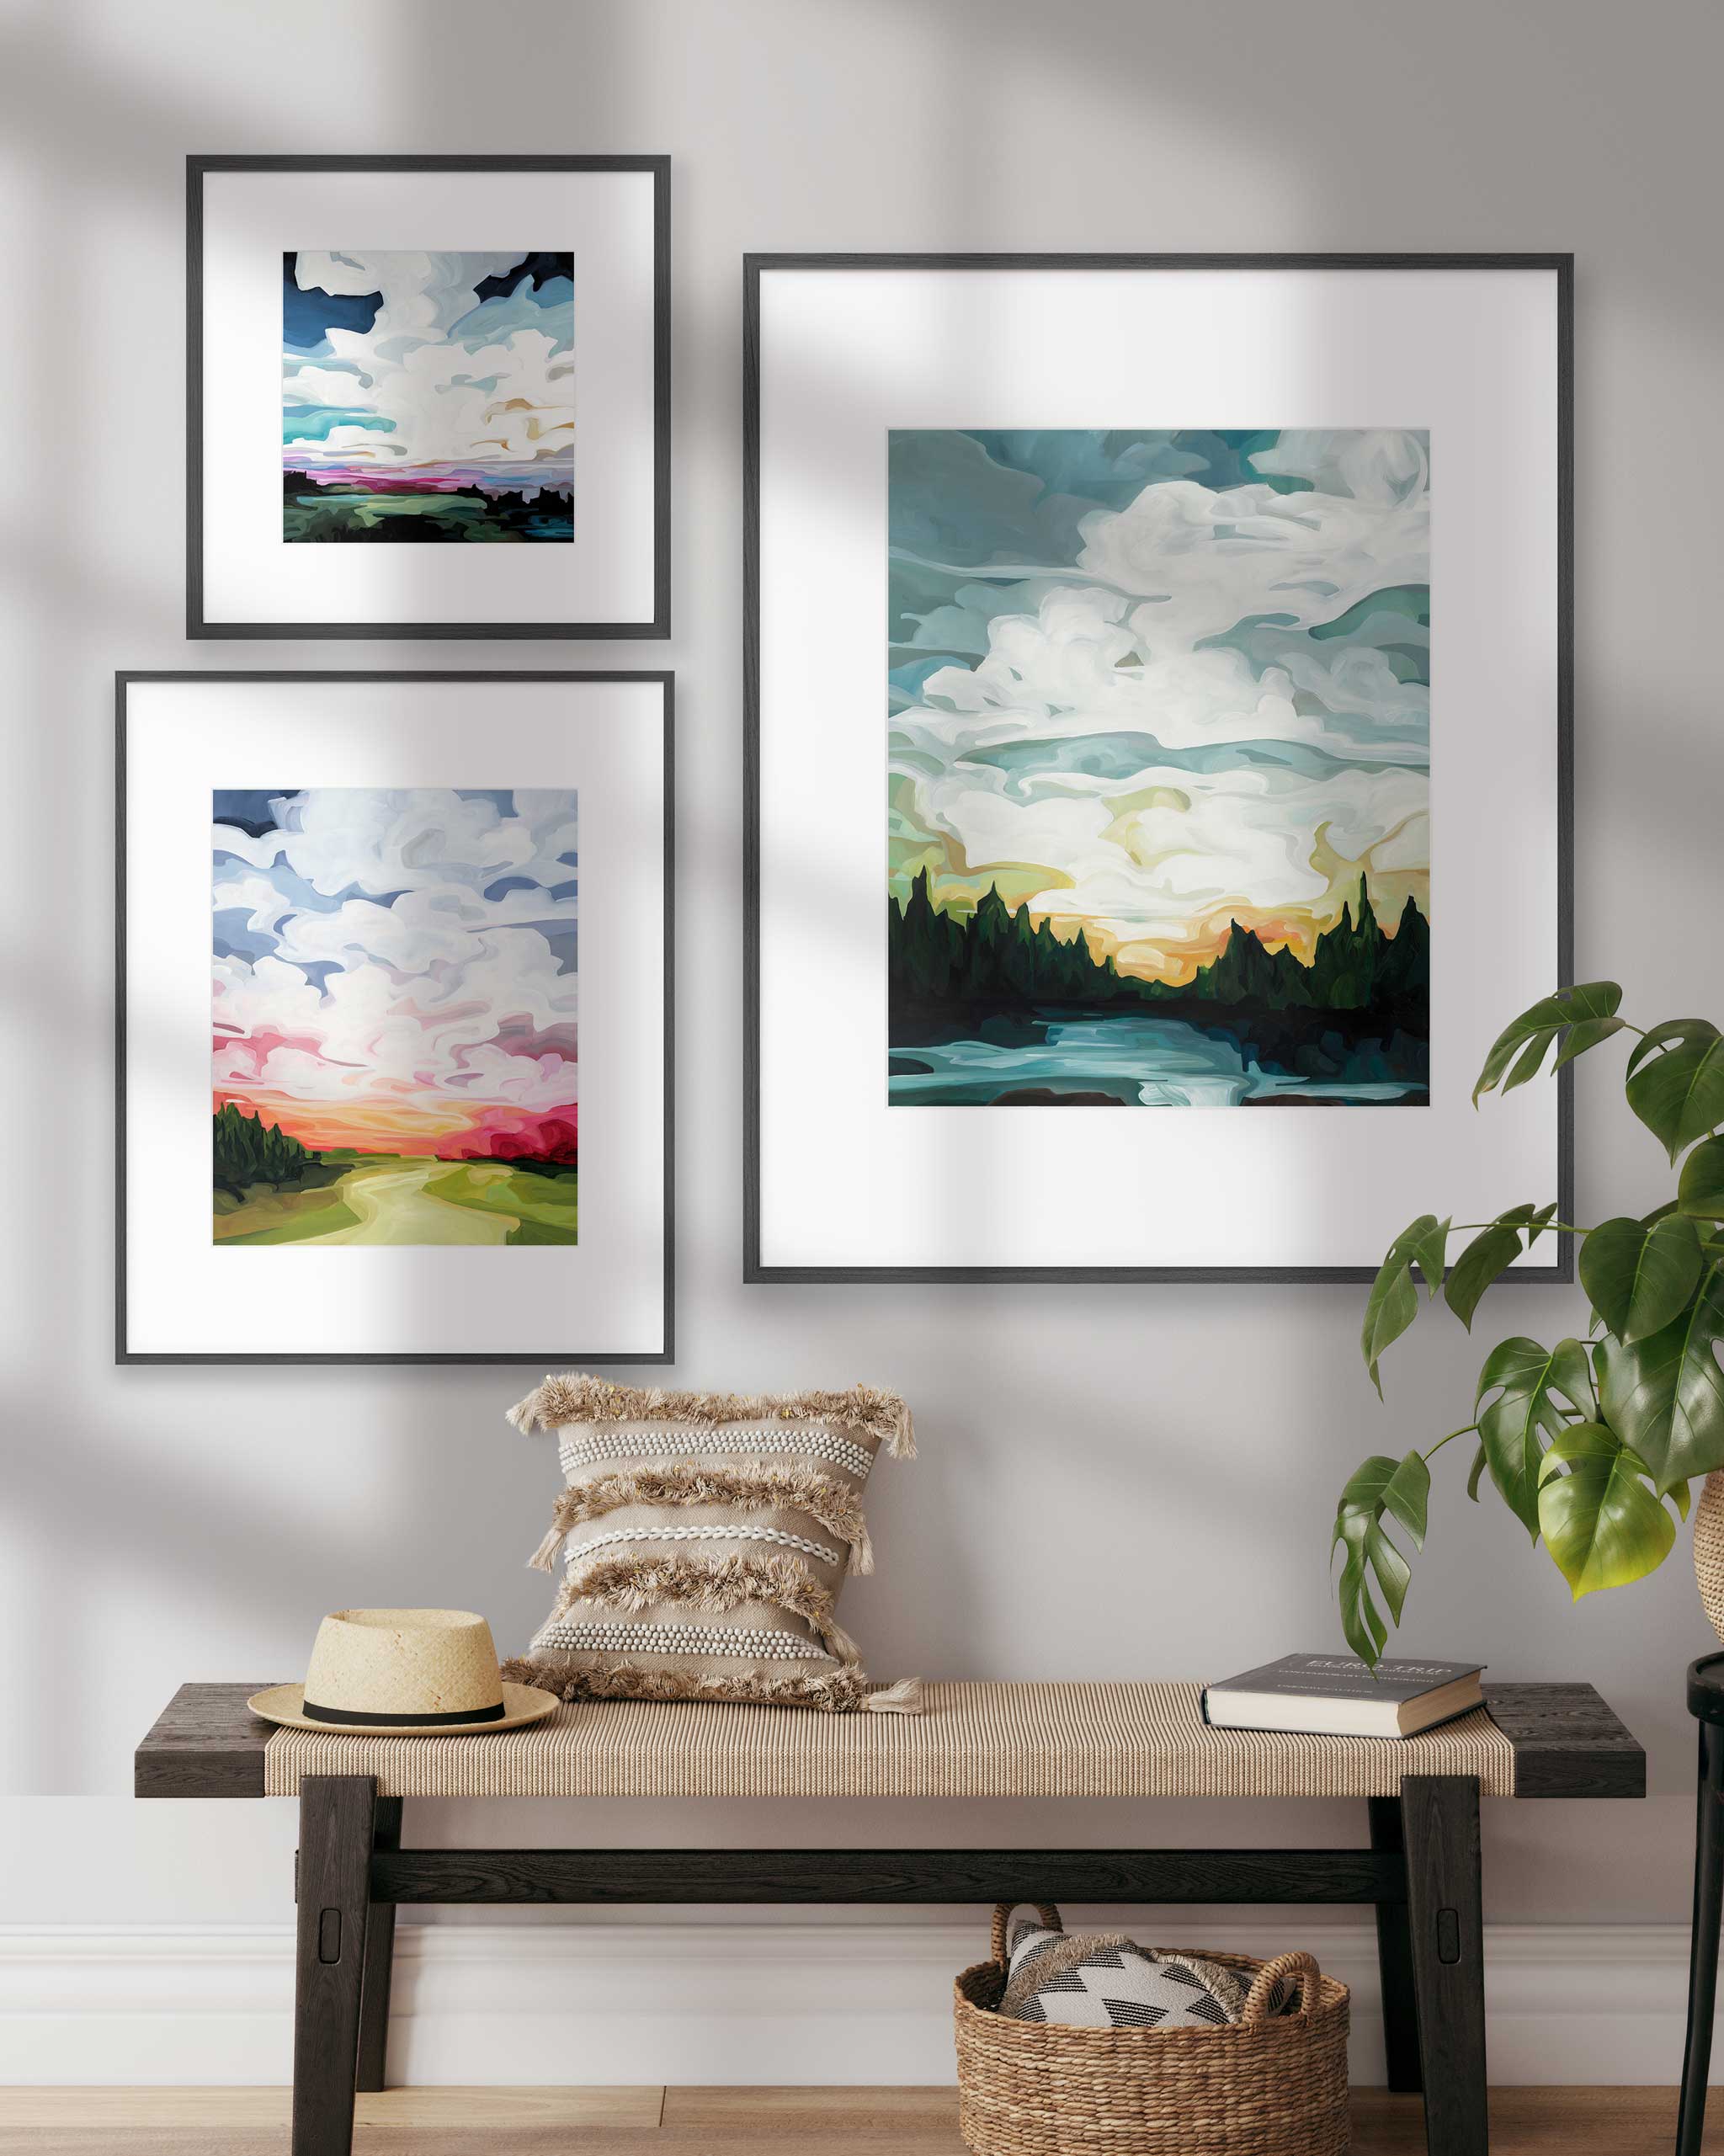 Gallery wall of framed fine art prints from the Forever Skies collection by Canadian artist Susannah Bleasby